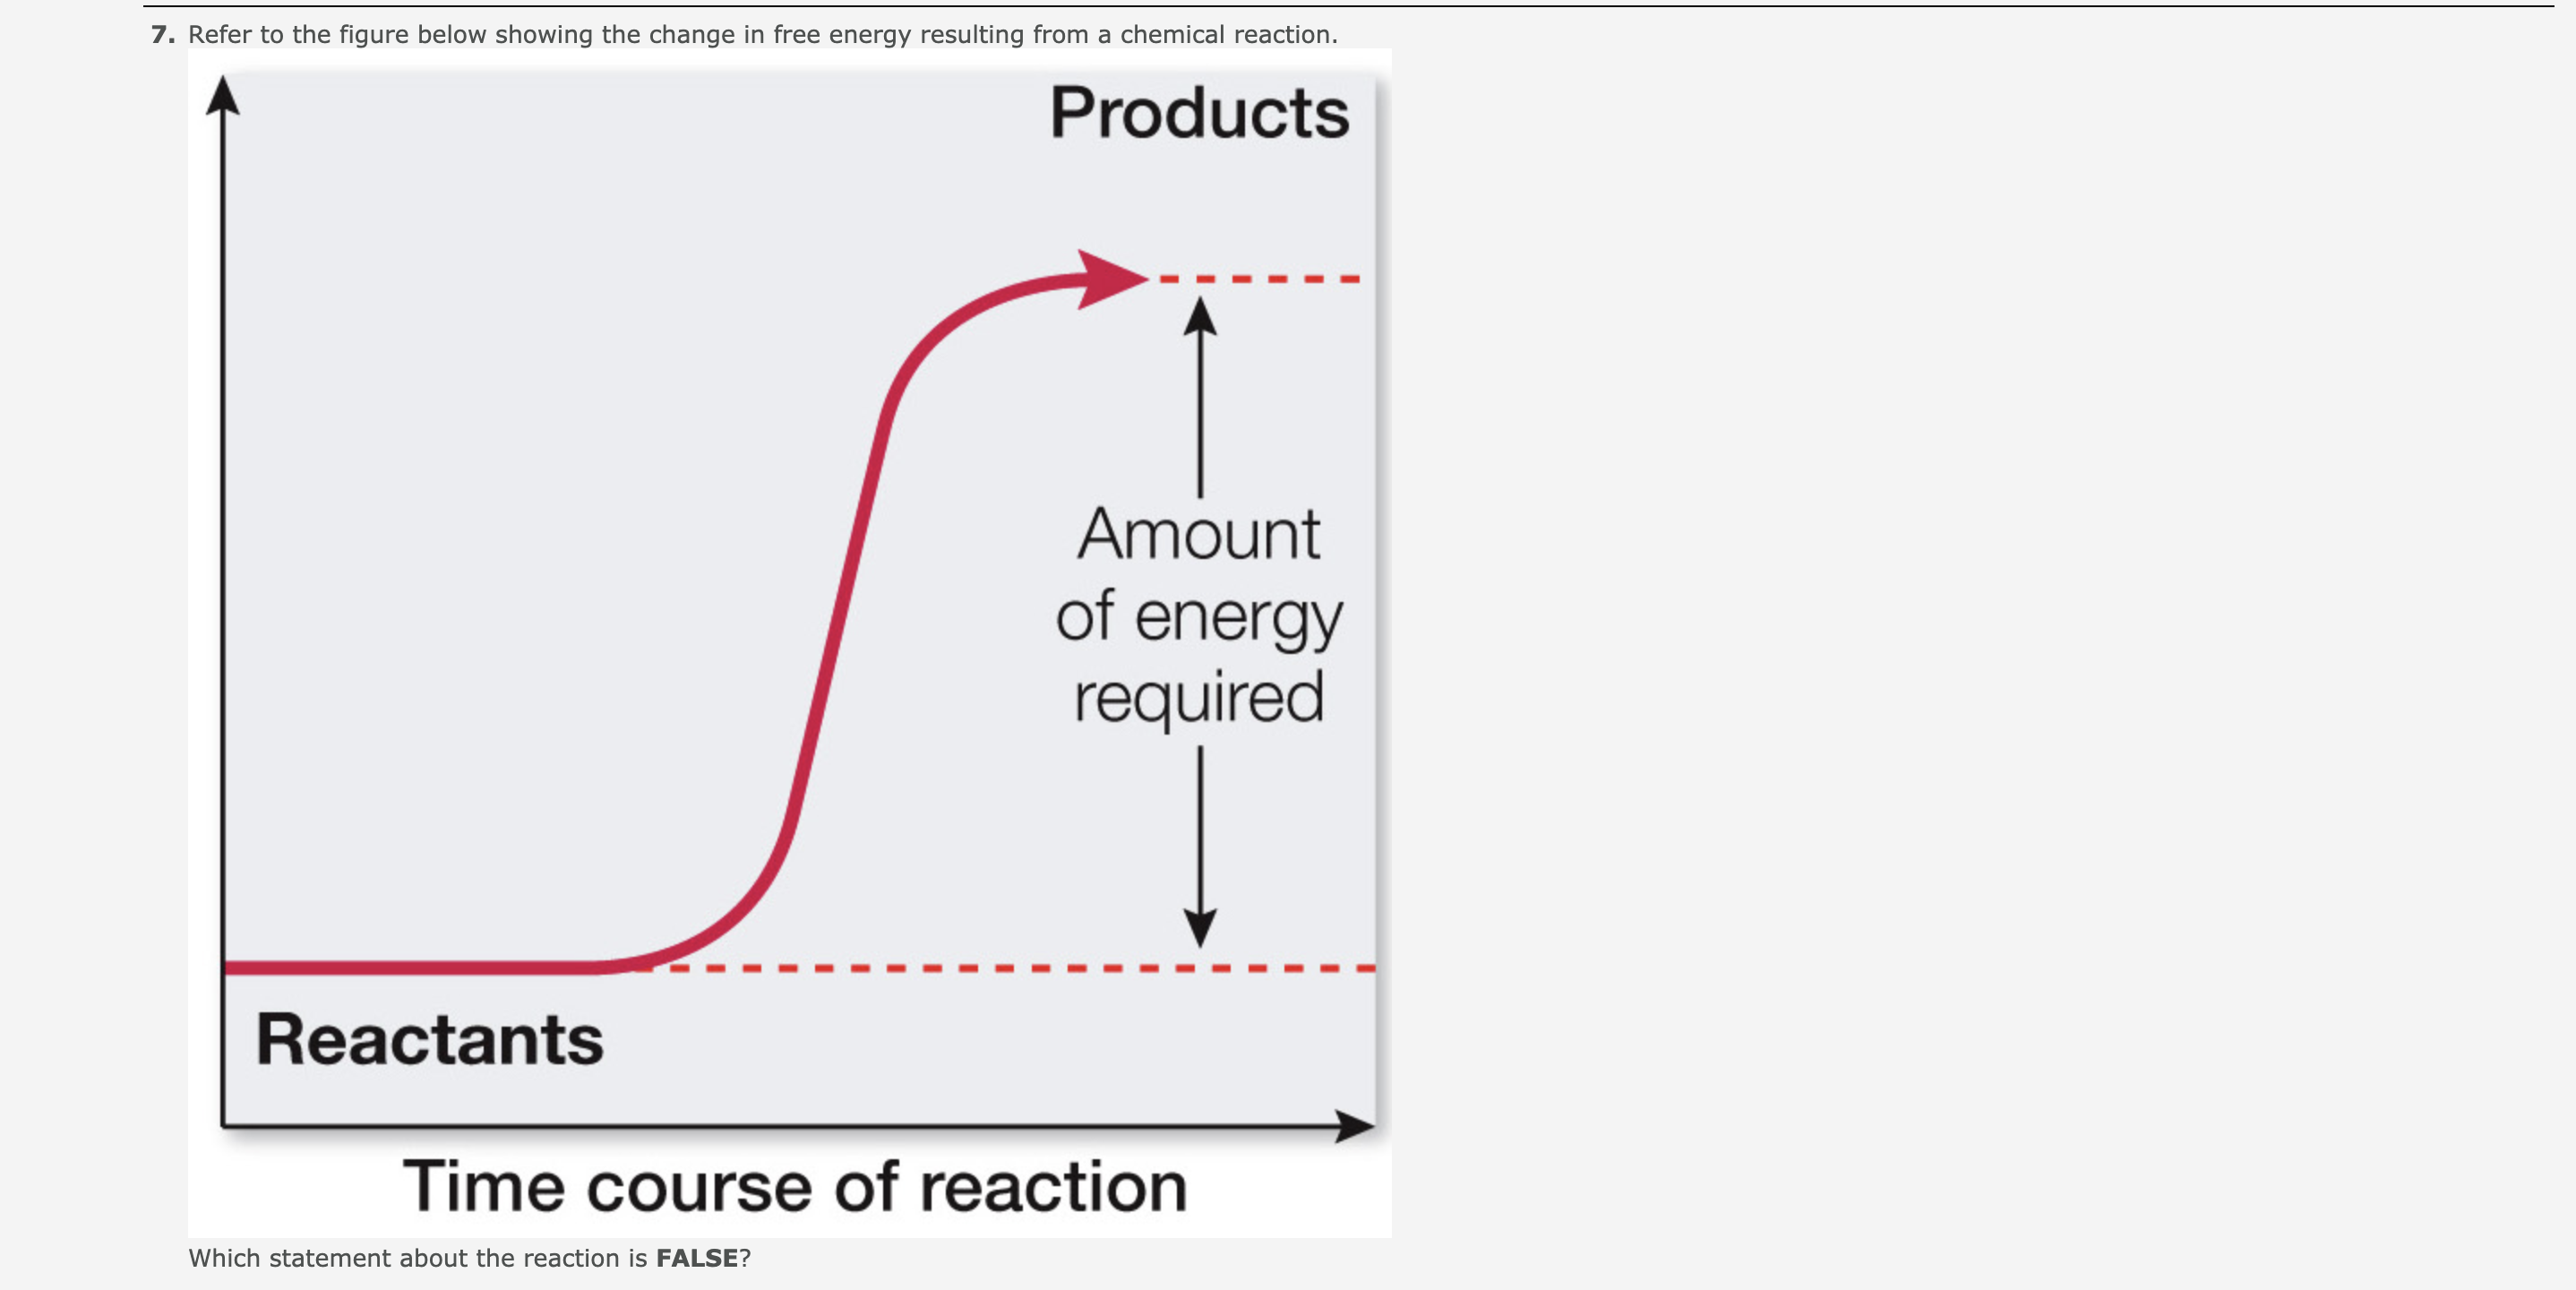 7. Refer to the figure below showing the change in free energy resulting from a chemical reaction.
Products
Amount
of energy
required
Reactants
Time course of reaction
Which statement about the reaction is FALSE?
